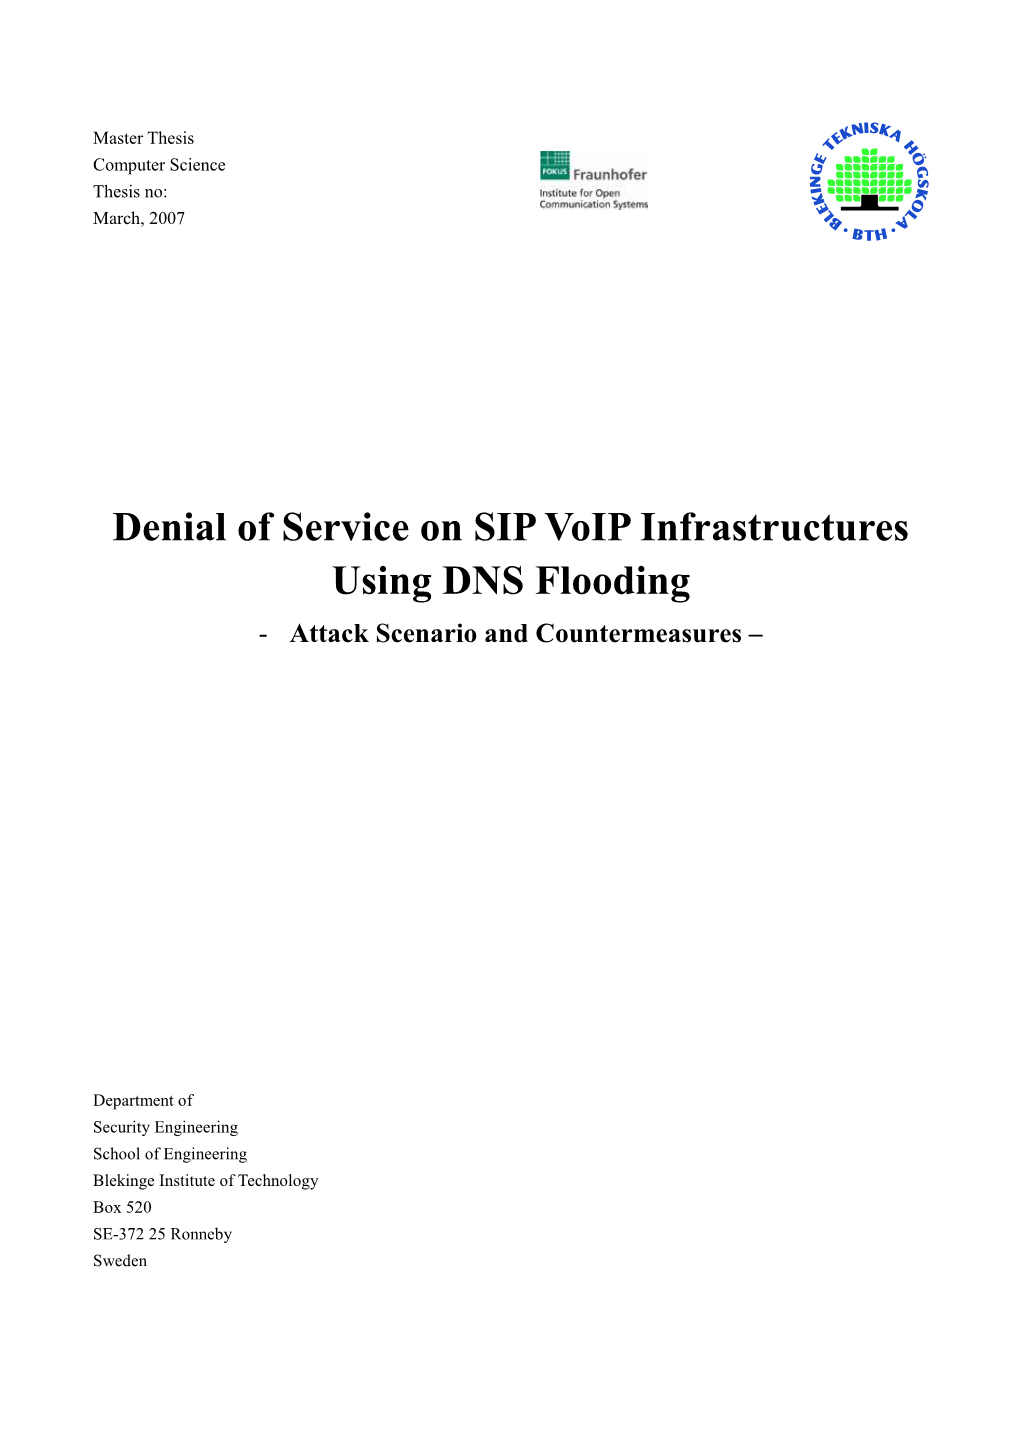 Denial of Service on SIP Voip Infrastructures Using DNS Flooding - Attack Scenario and Countermeasures –